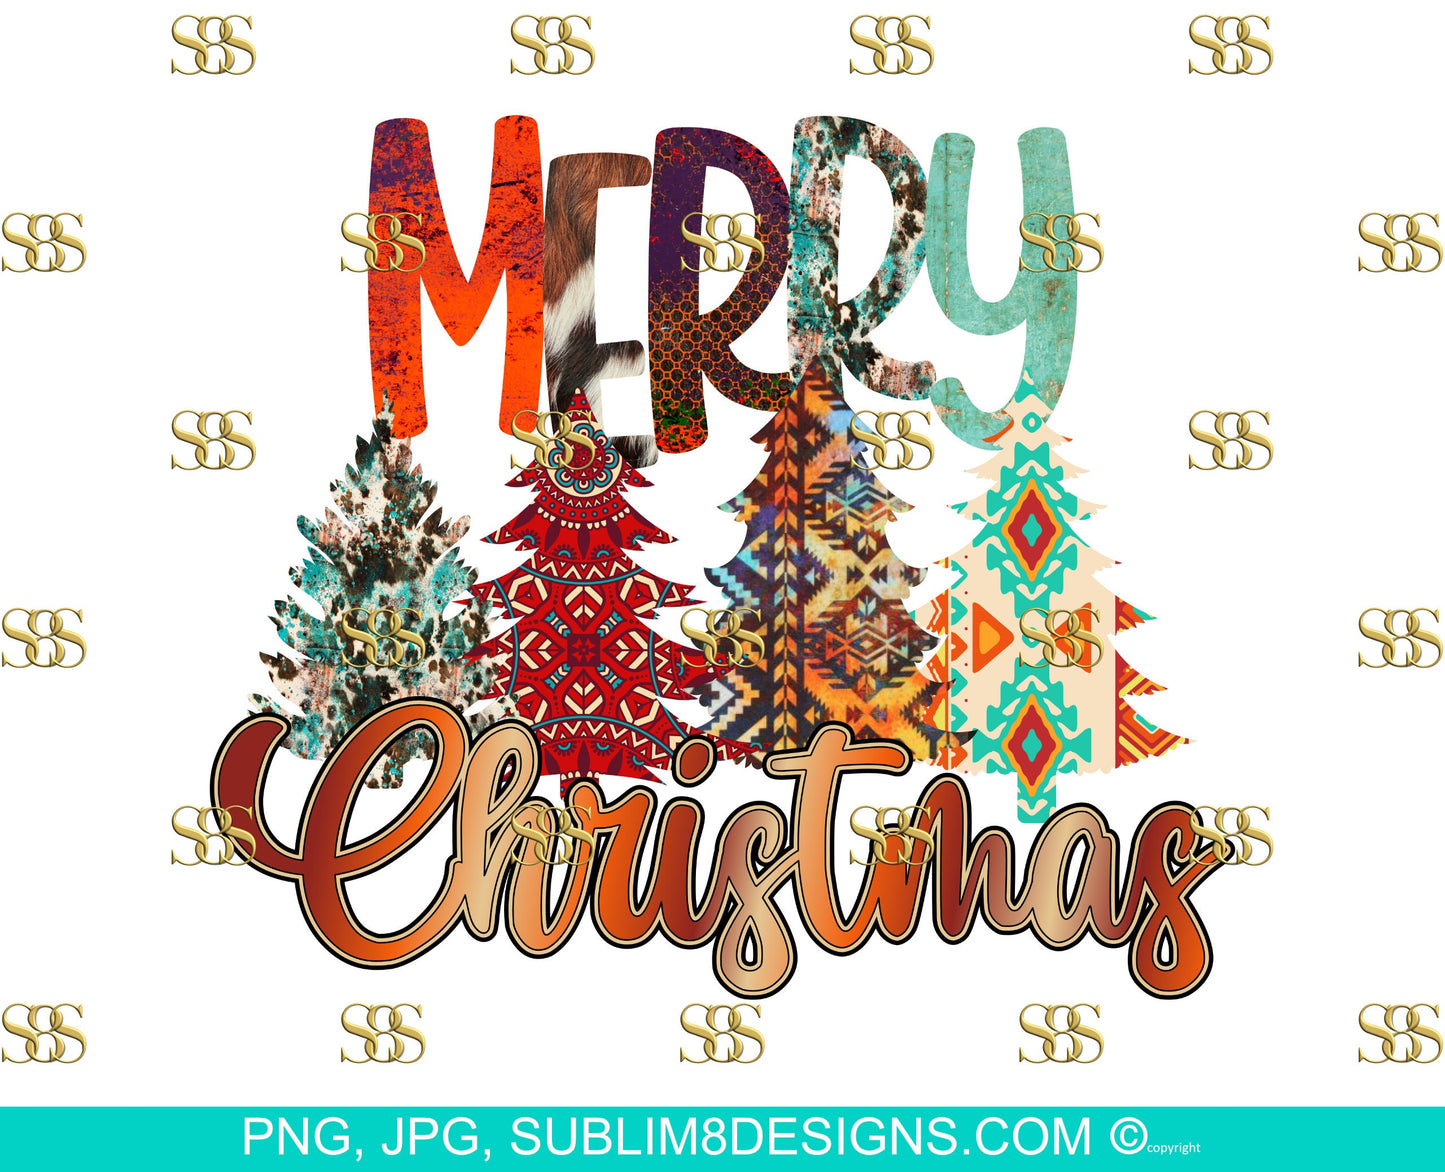 Merry Christmas Rustic Tribal Sublimation Design PNG and JPG ONLY